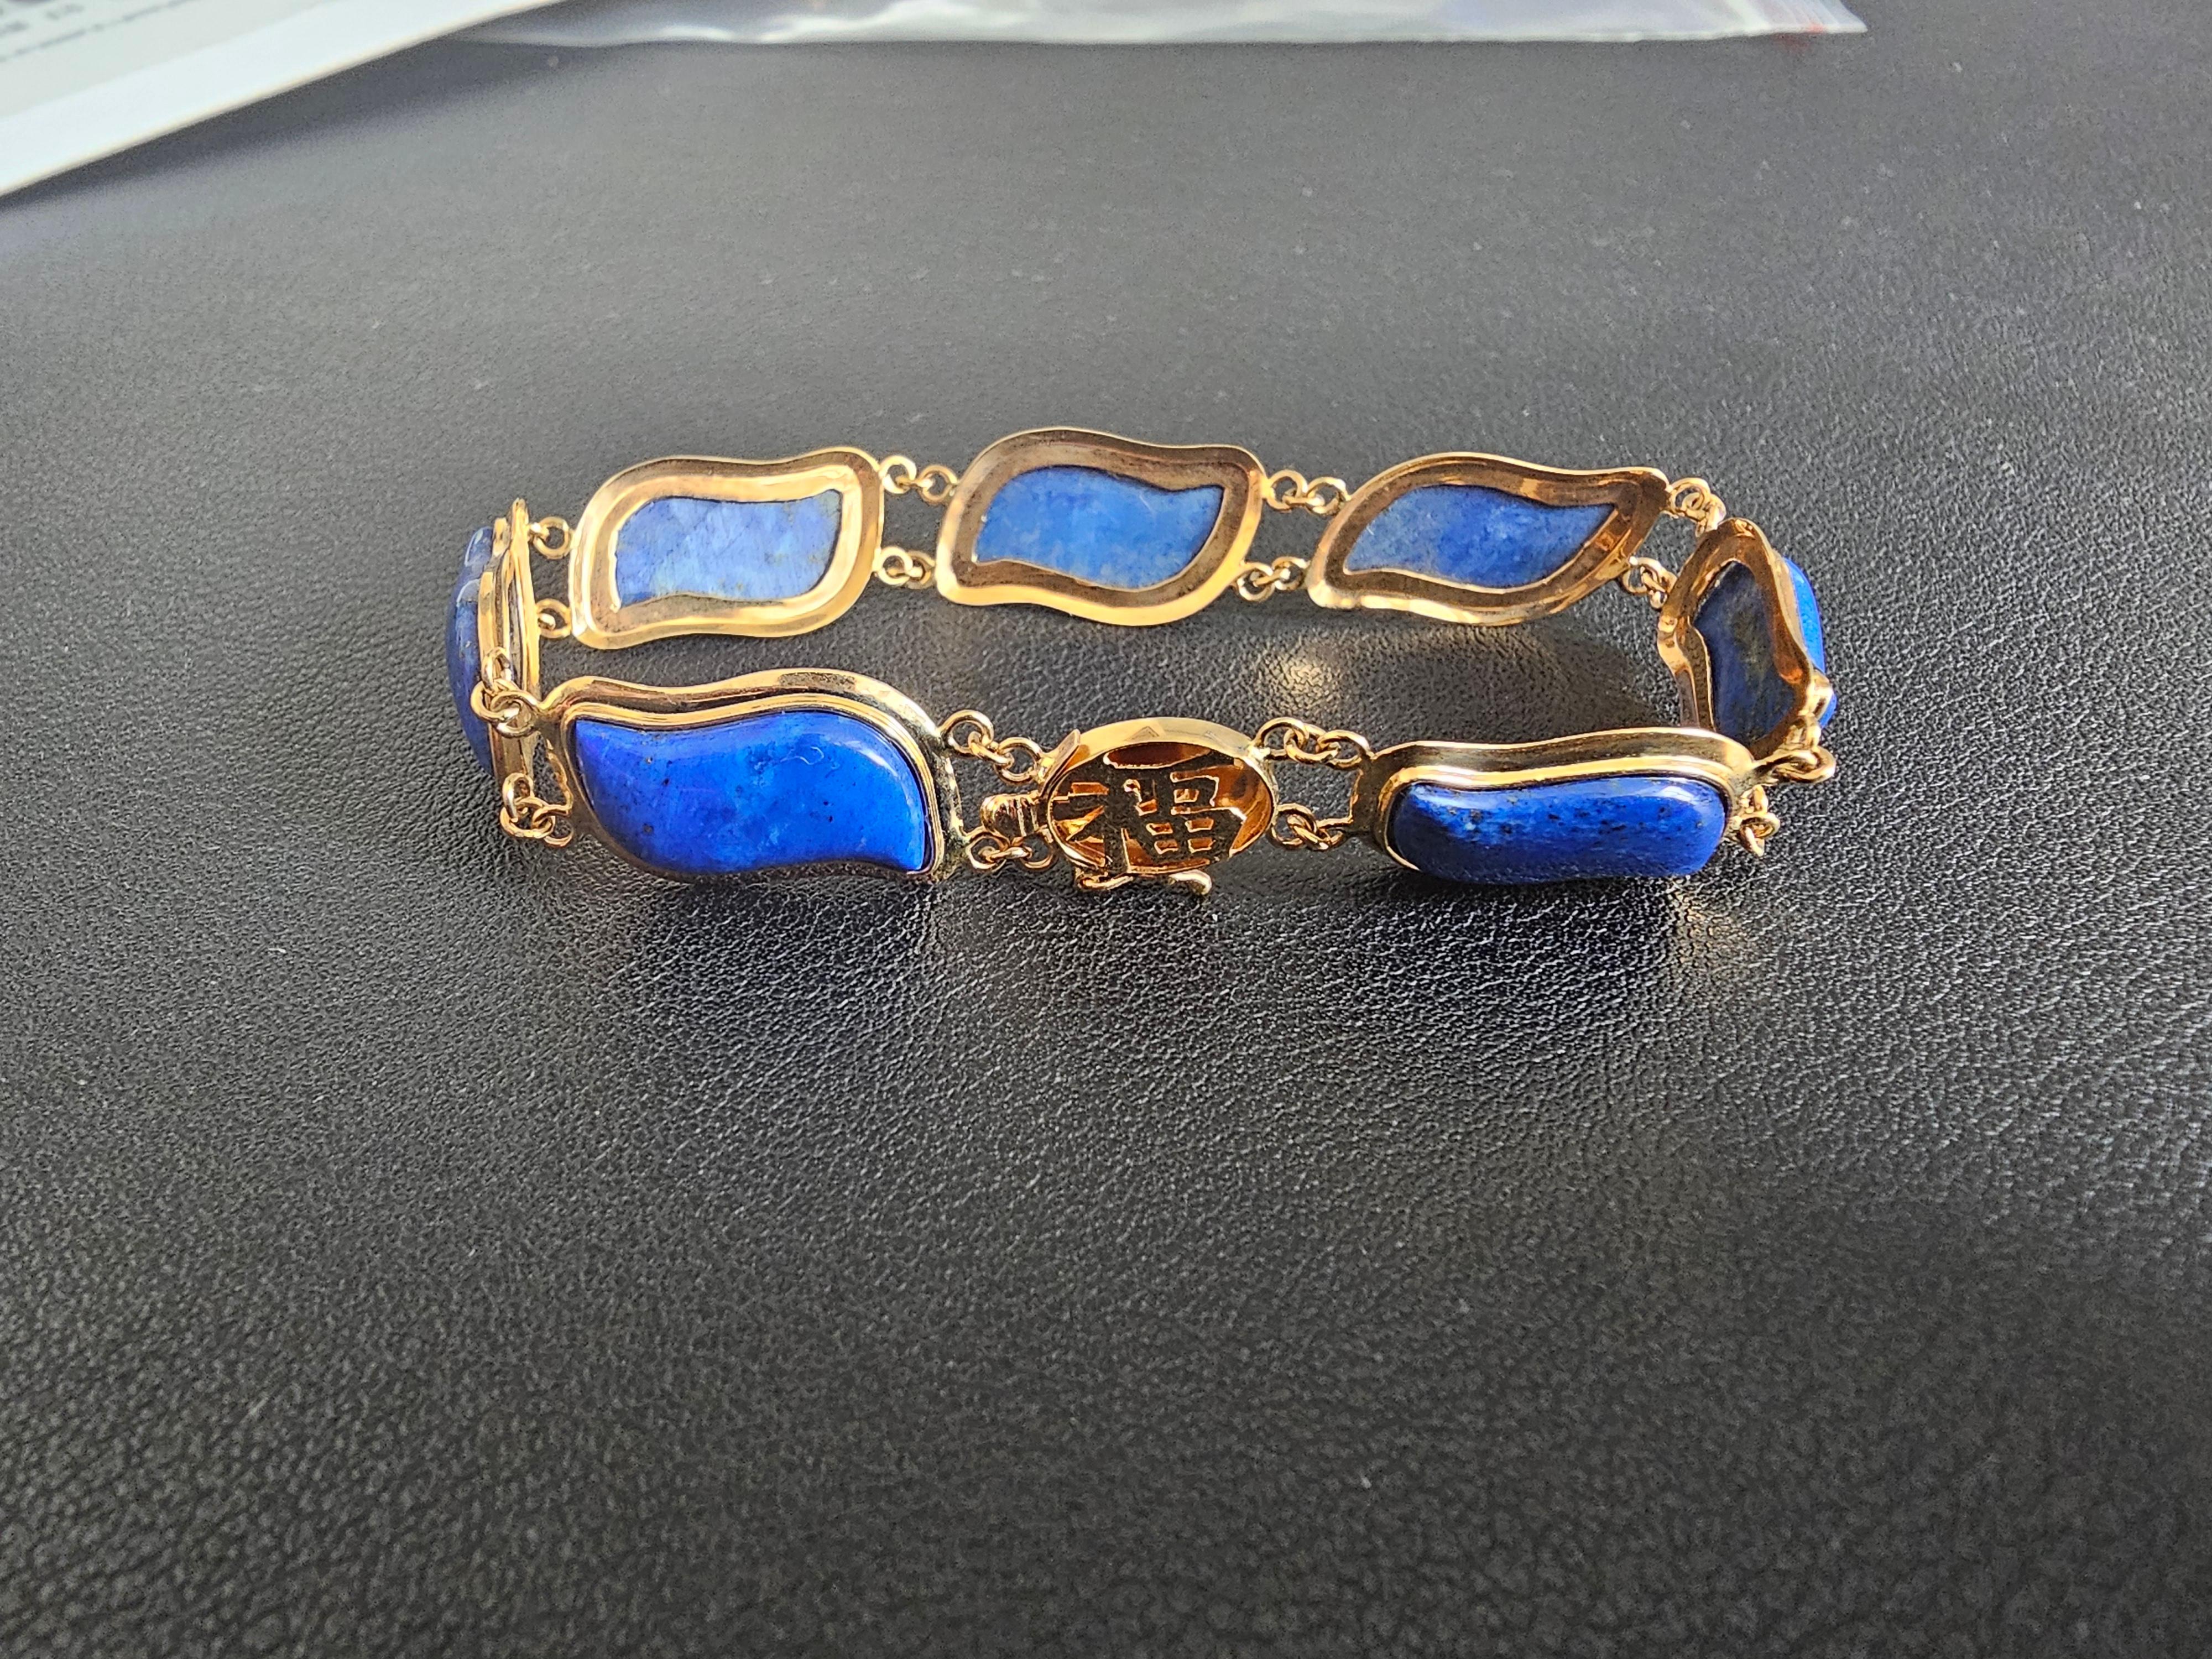 Blue Lapis Lazuli Bracelet Aurora Double Chained with 14K Solid Yellow Gold For Sale 3